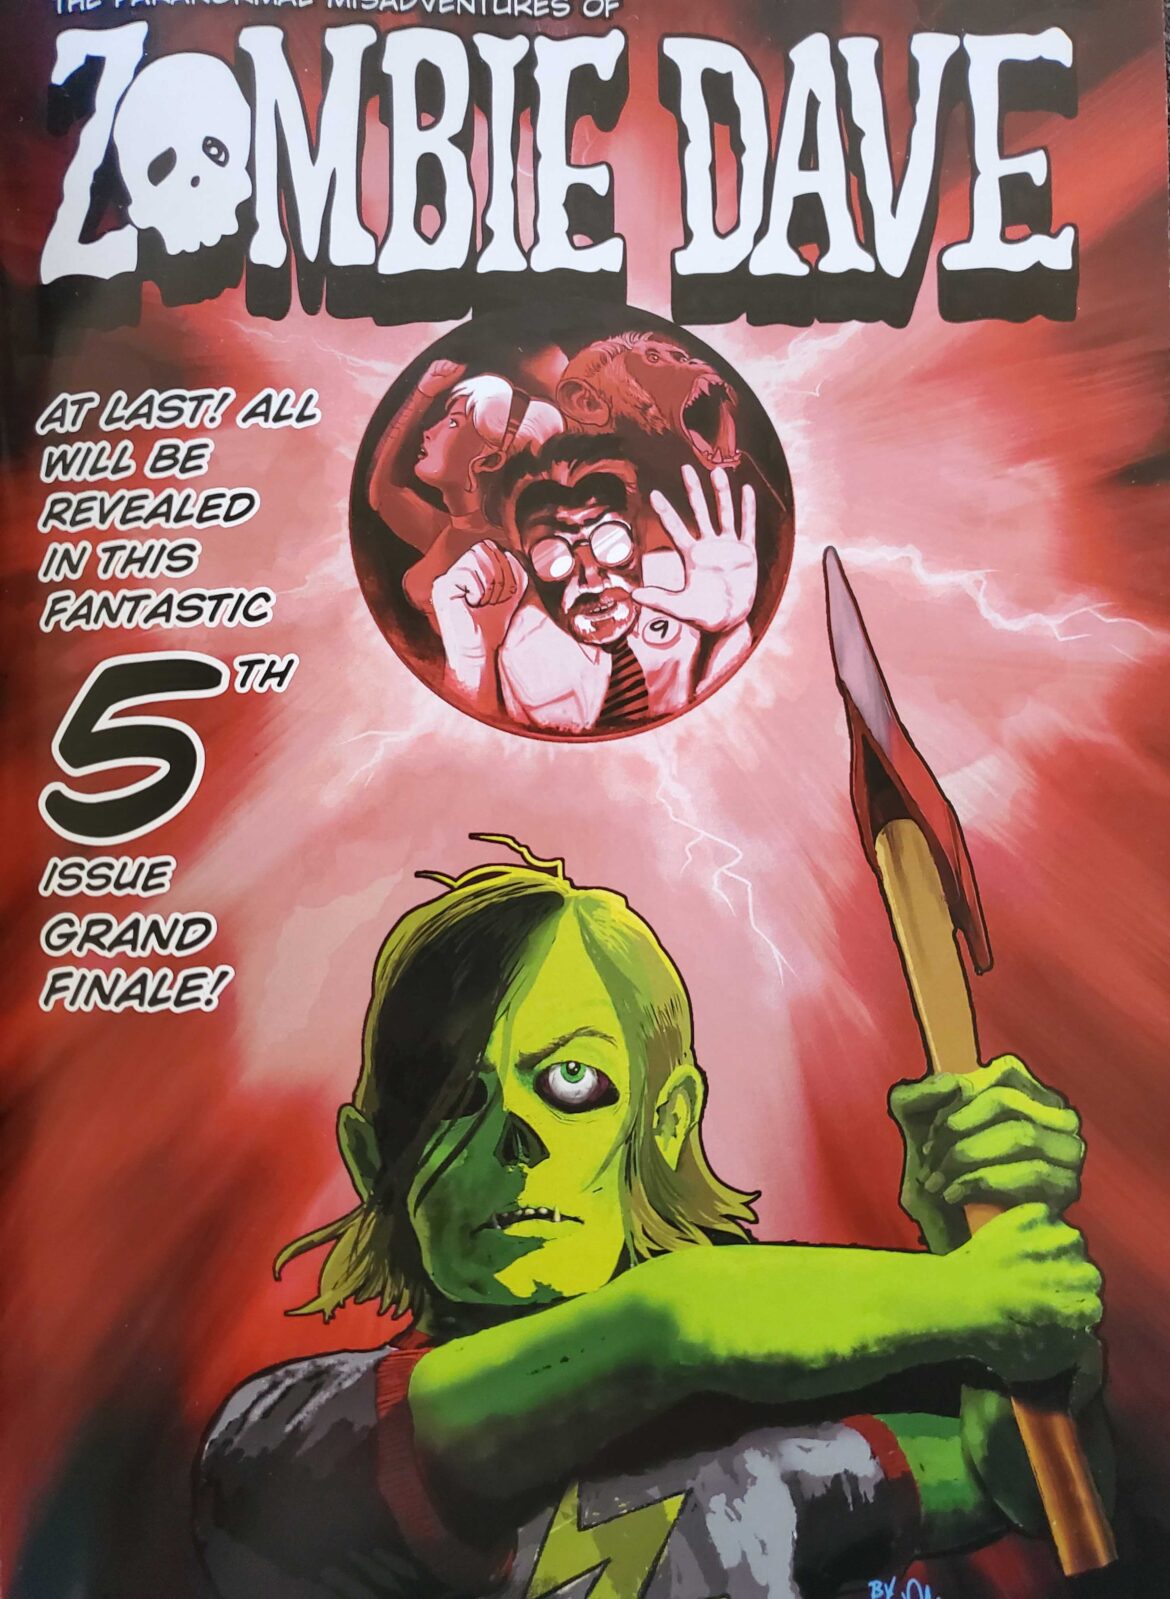 Comic Review: The Paranormal Misadventures of Zombie Dave  -Issue # 5